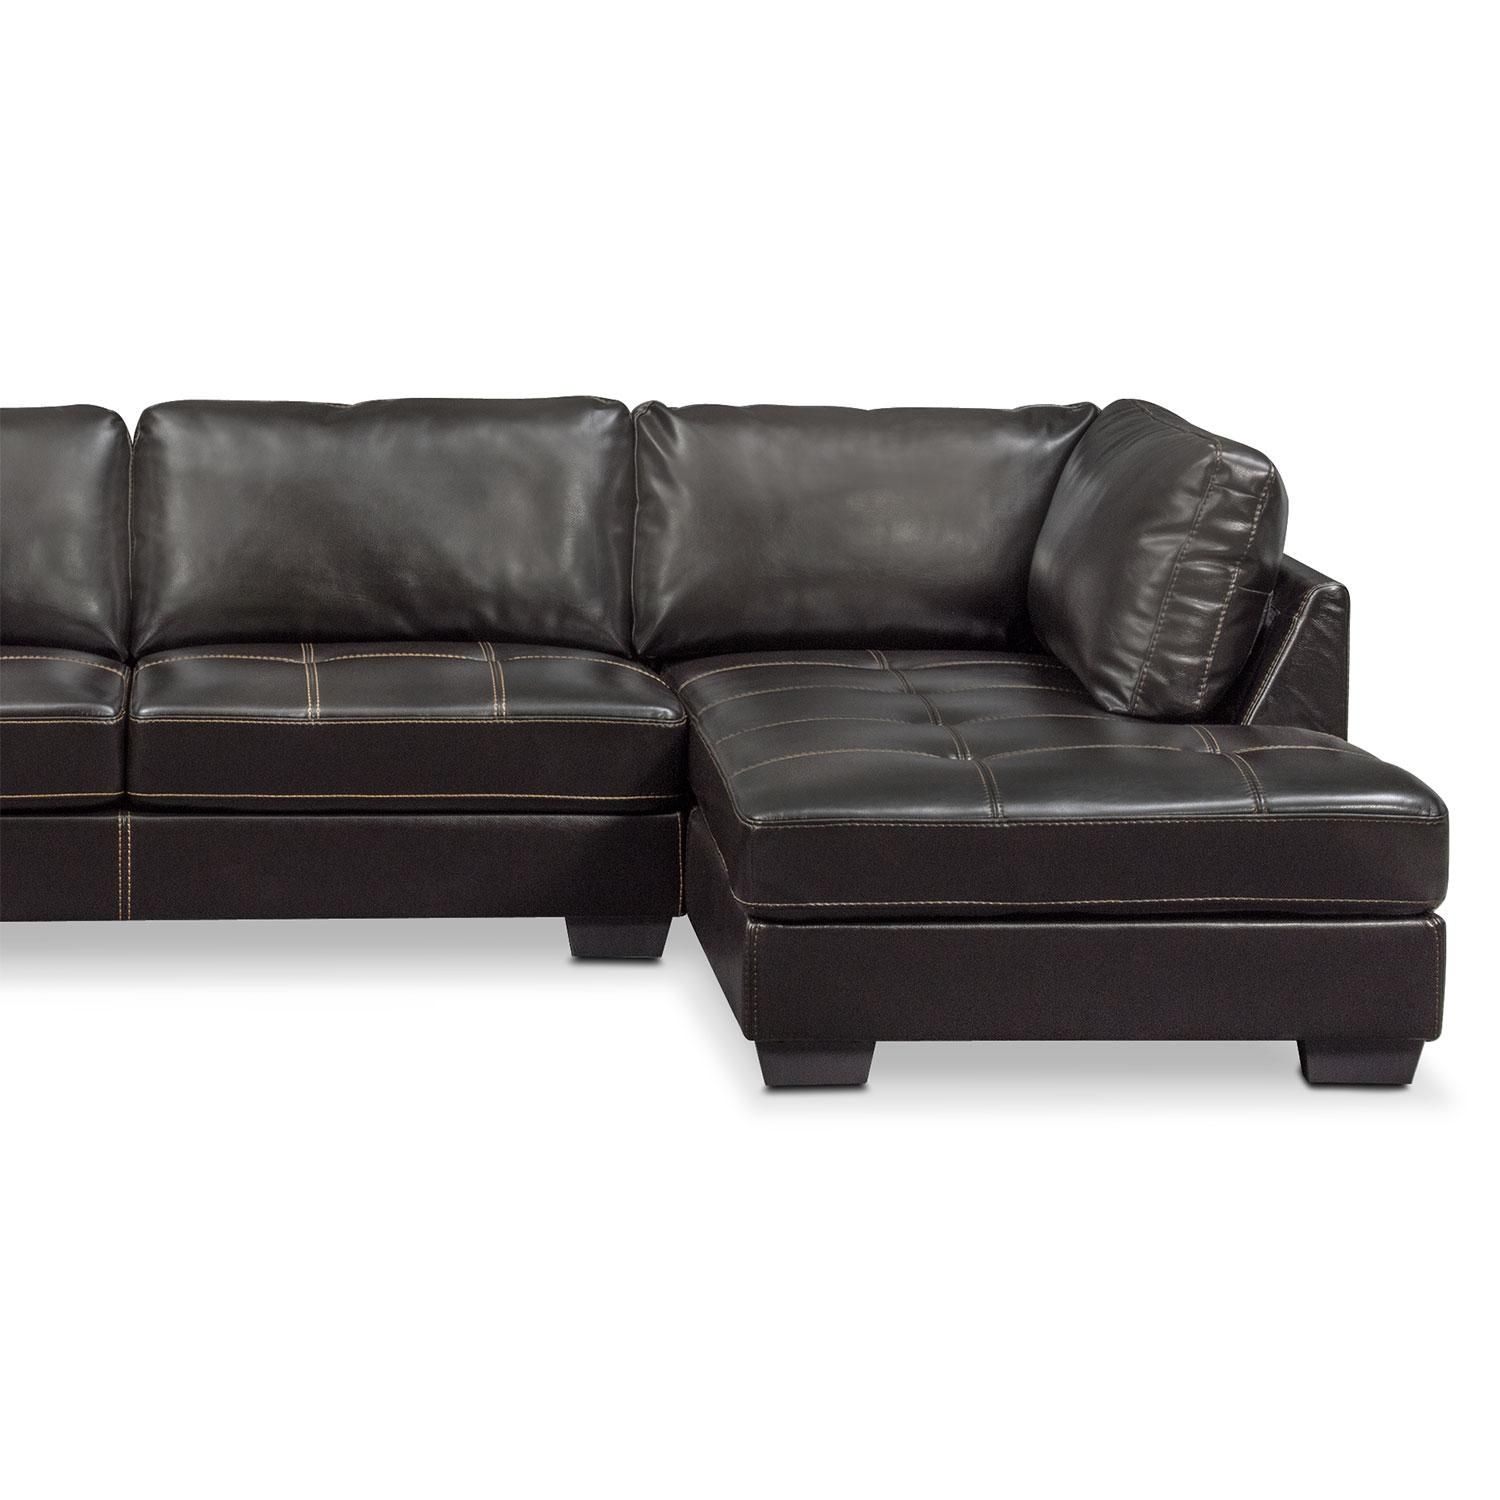 Santana 3 Piece Sectional – Black | Value City Furniture Regarding Black And White Sectional (View 15 of 15)